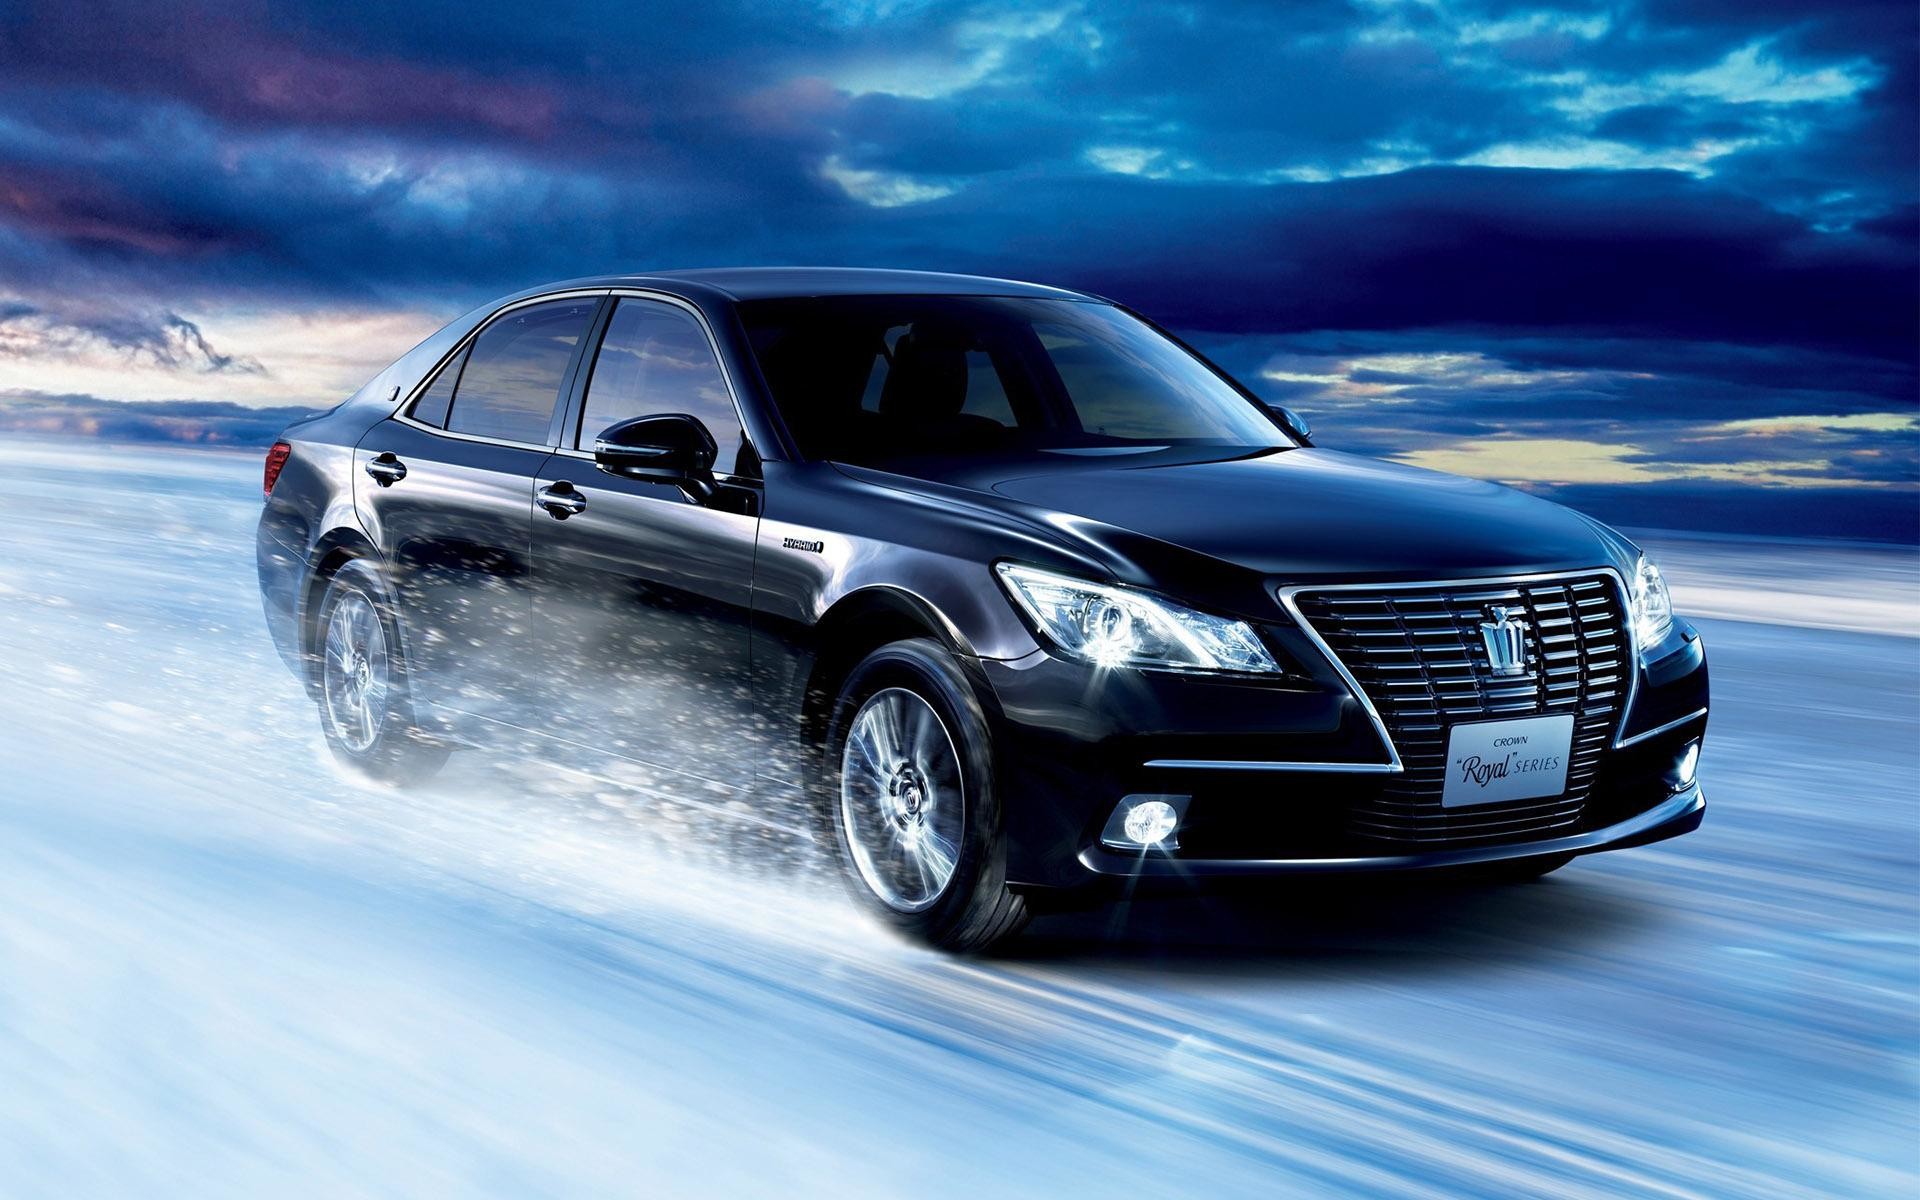 1920x1200 Toyota Crown Royal Series rushing in the snow